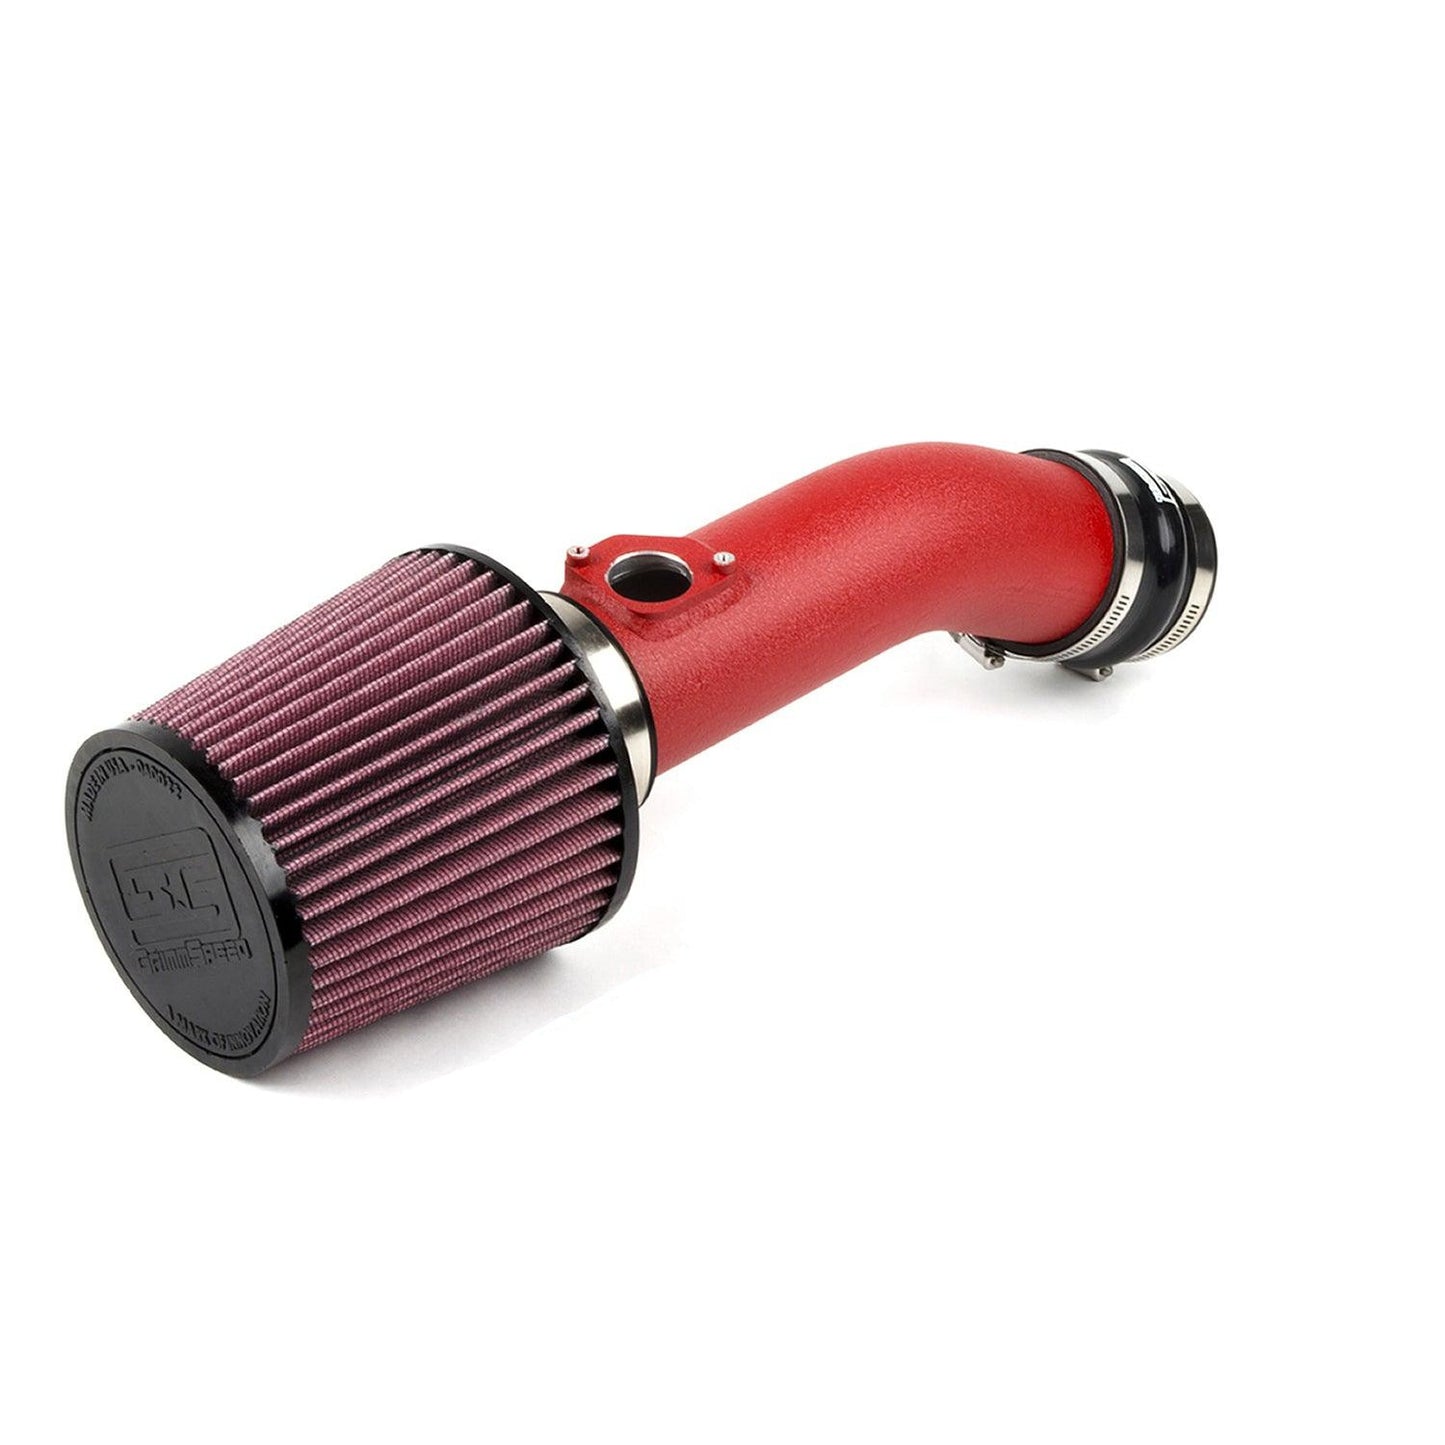 GrimmSpeed Cold Air Intakes - Legacy GT 2005-2009